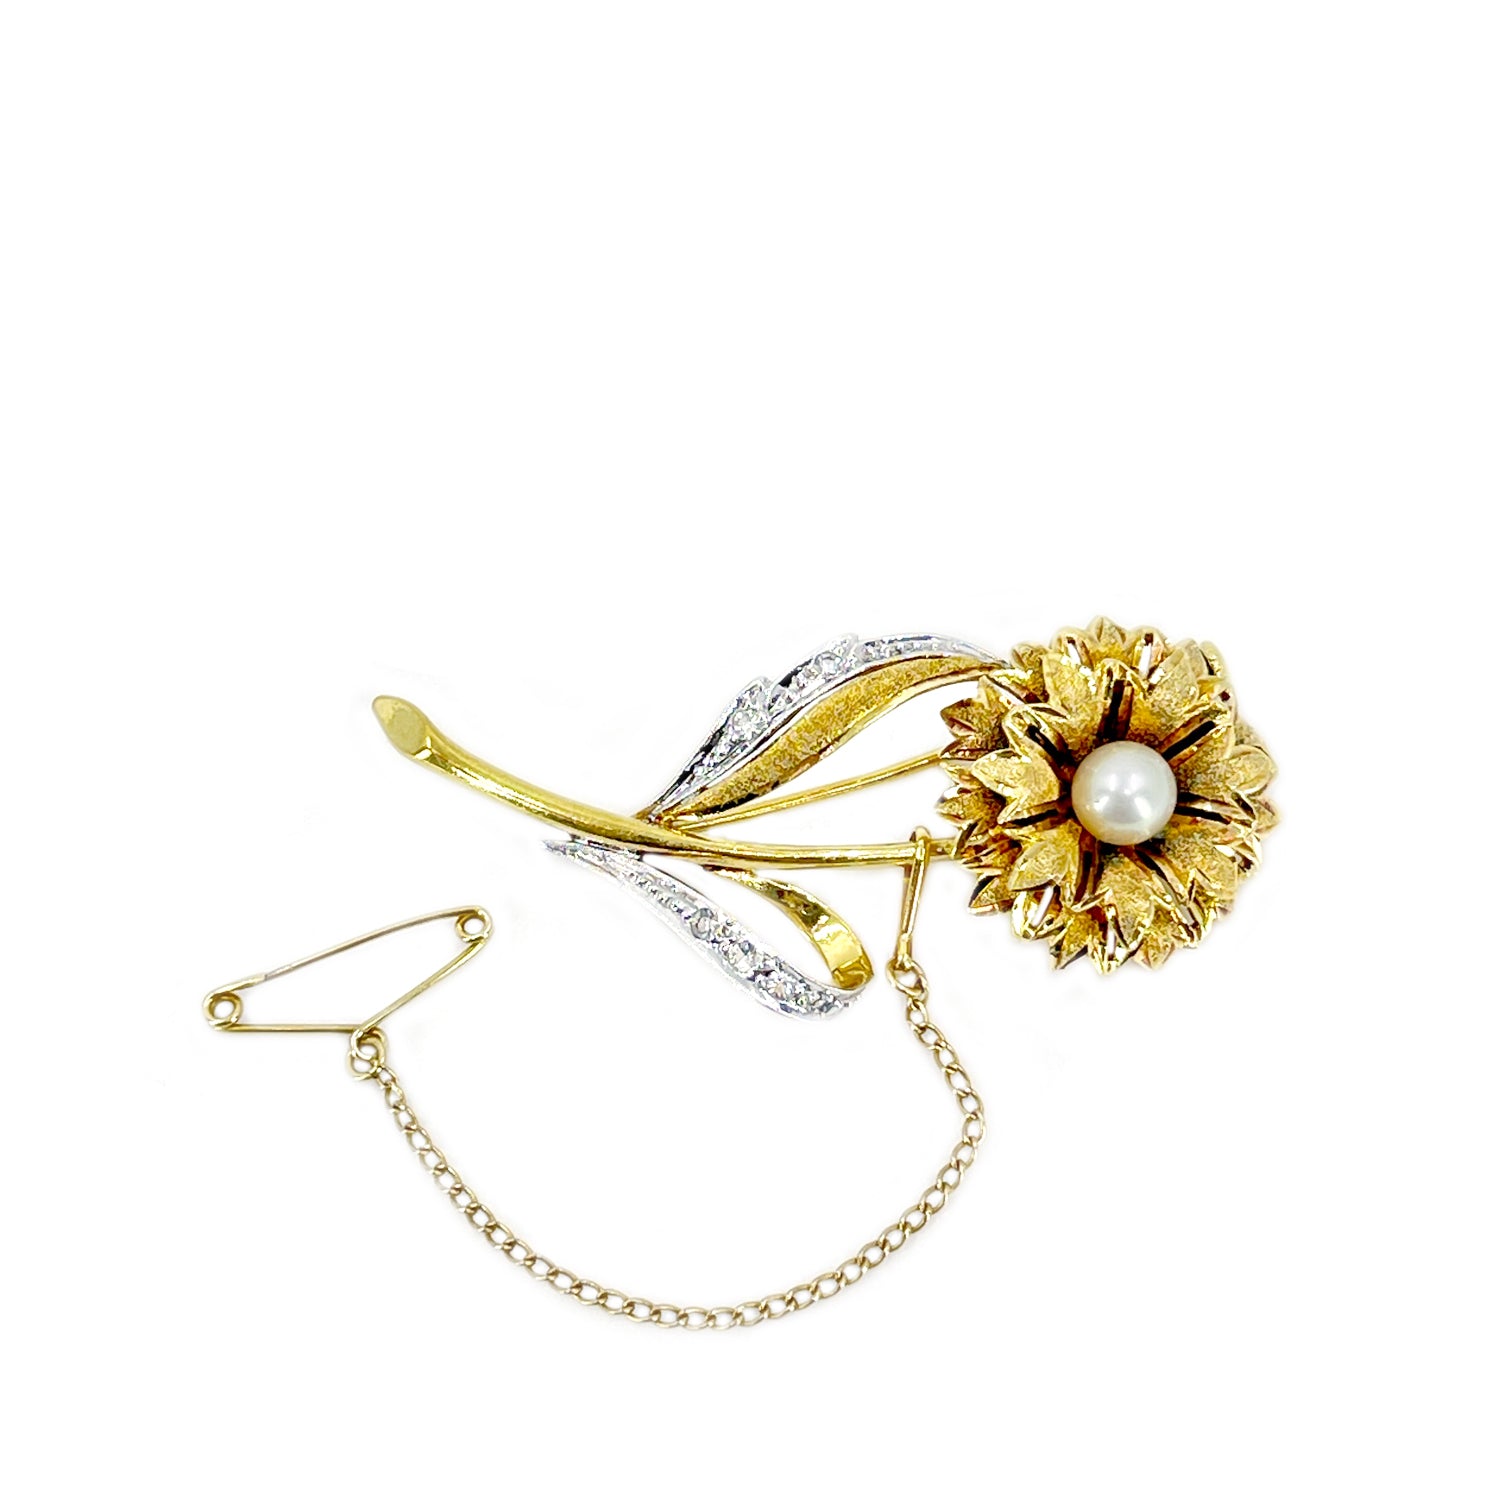 Two Tone Retro Vintage Japanese Cultured Saltwater Akoya Pearl Flower Brooch- Sterling Silver Gold Plate